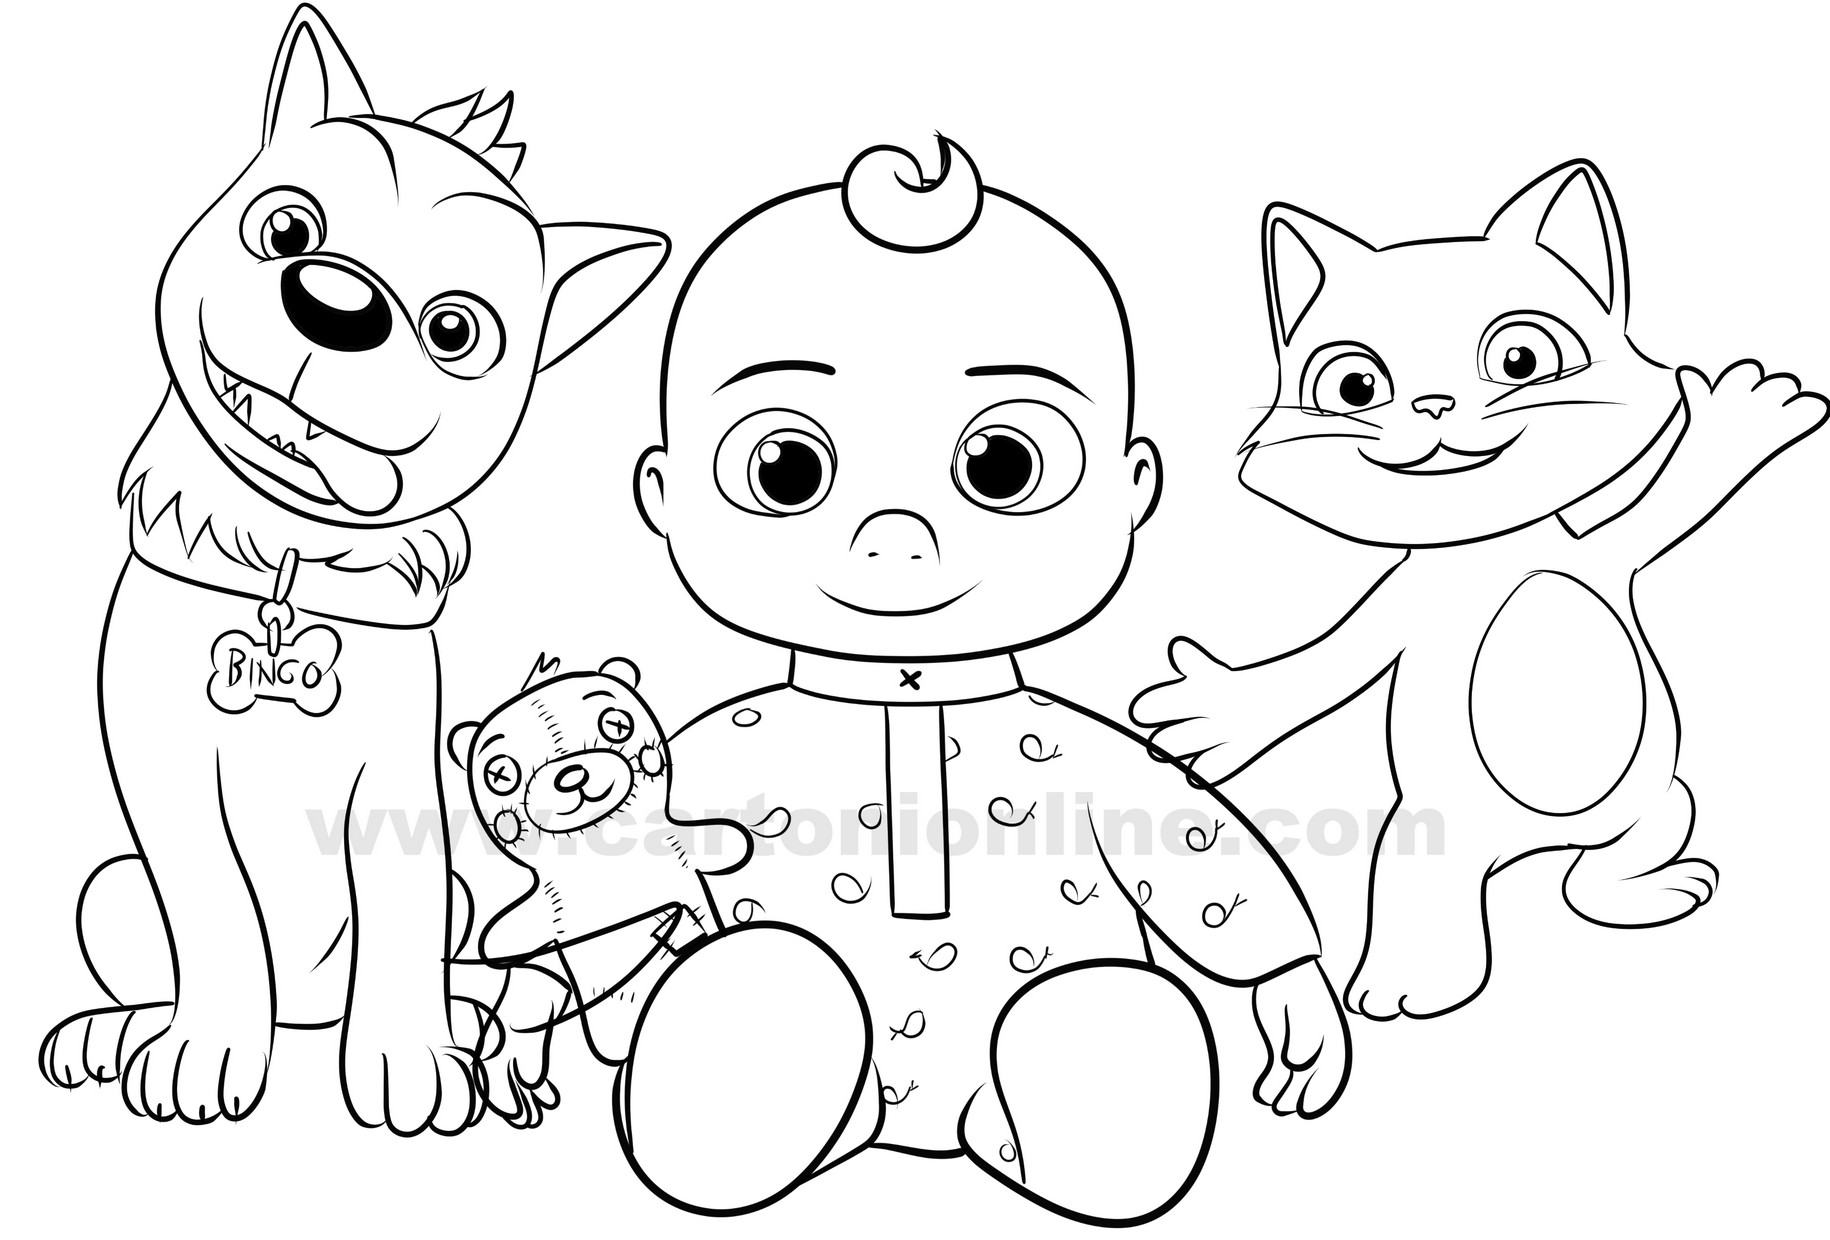 Bingo, J.J., Kiki from Cocomelon coloring page to print and coloring